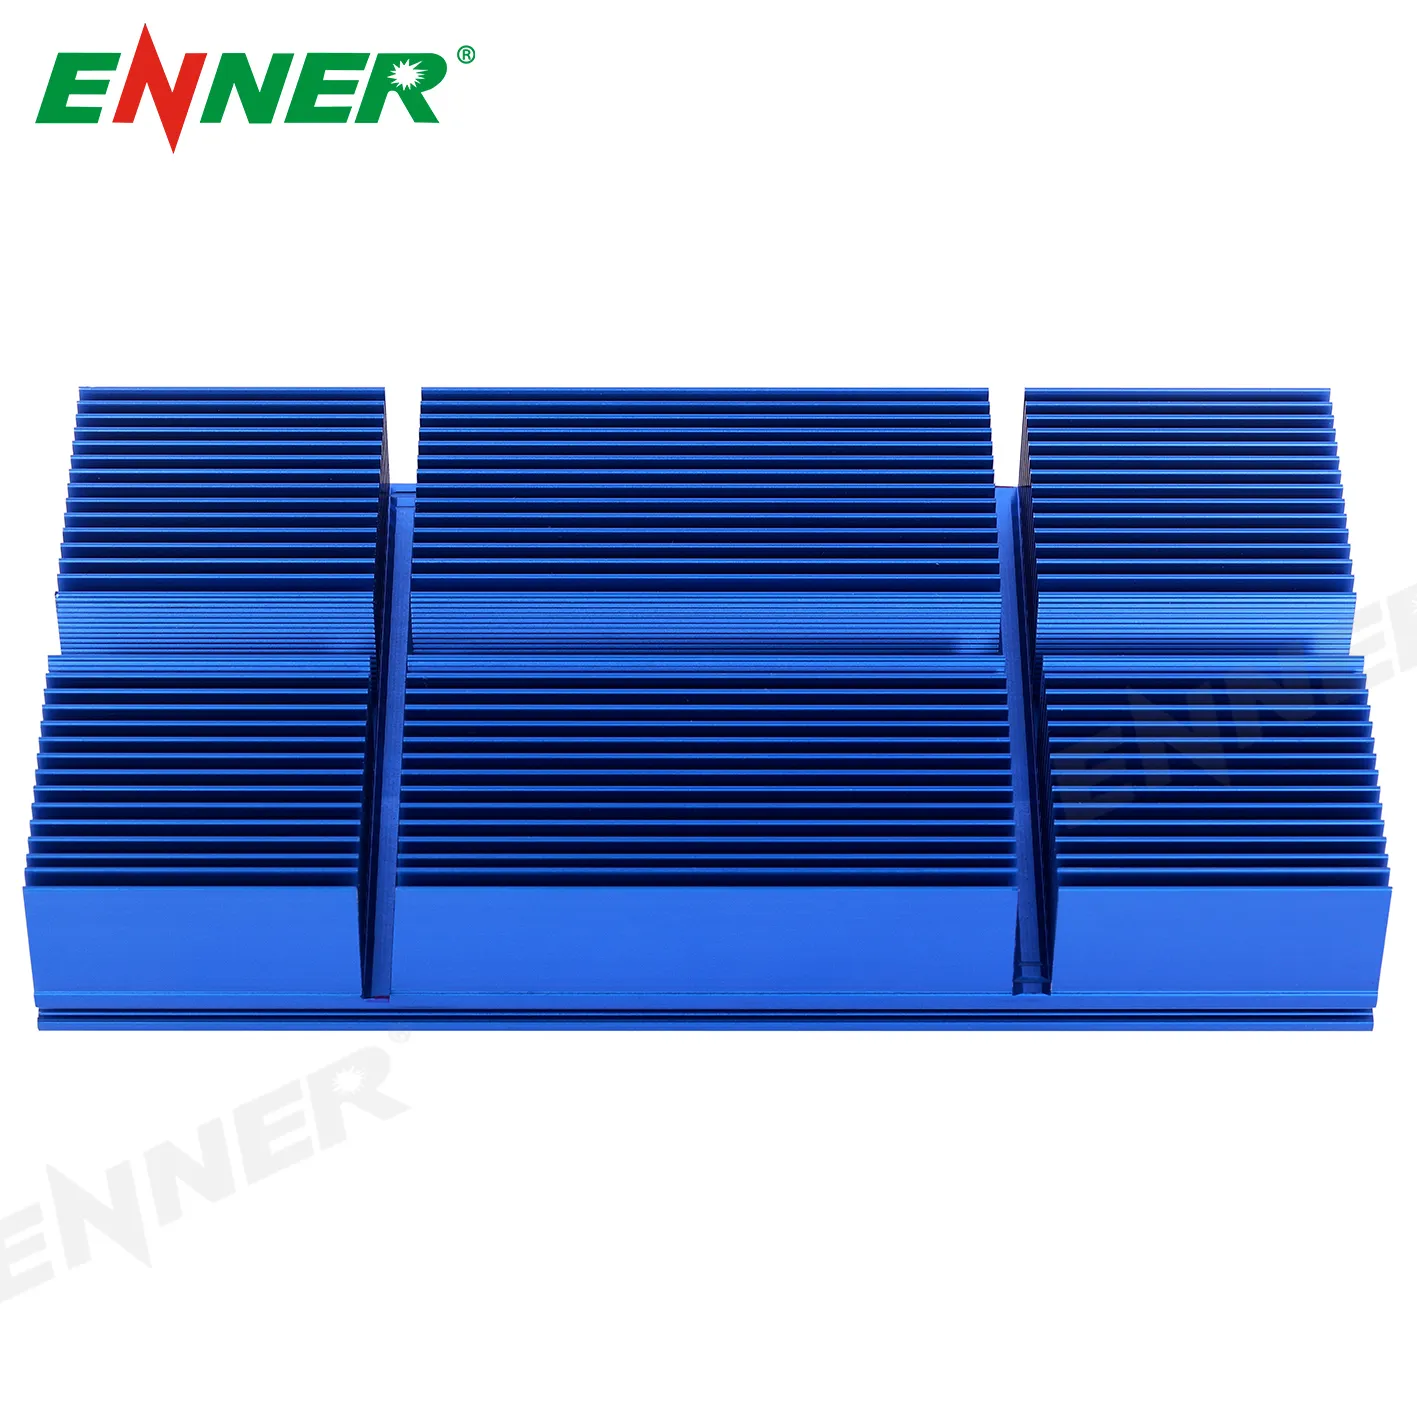 Cooler Radiator 200Mm Heat Sink Cold Forged 150W Led Heat Sink Without Break Sharp Cutting Edges